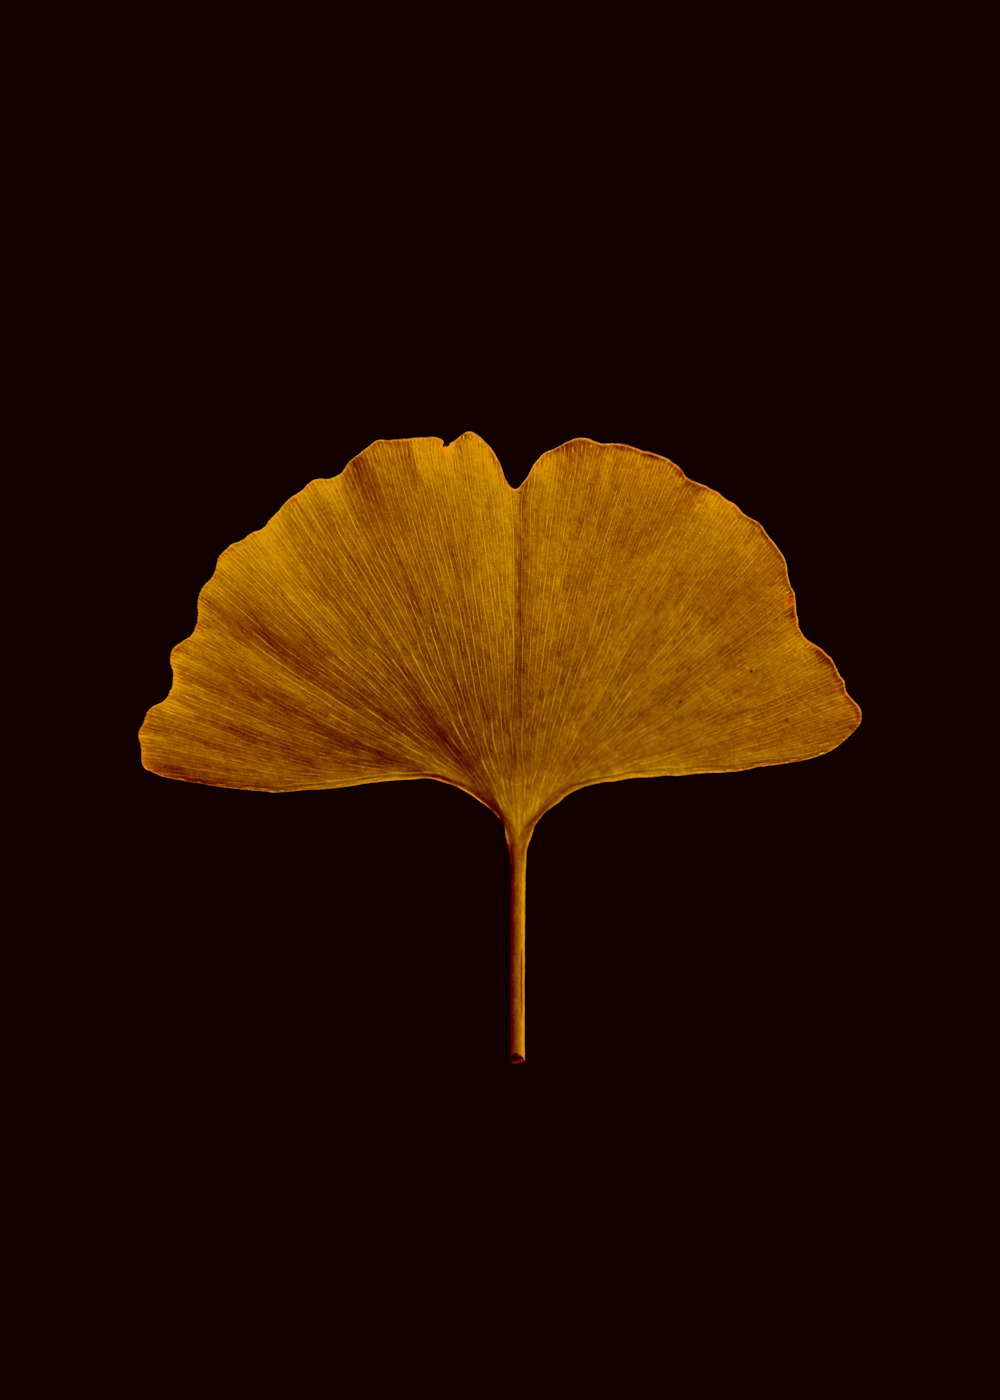 yellow leaf in black background